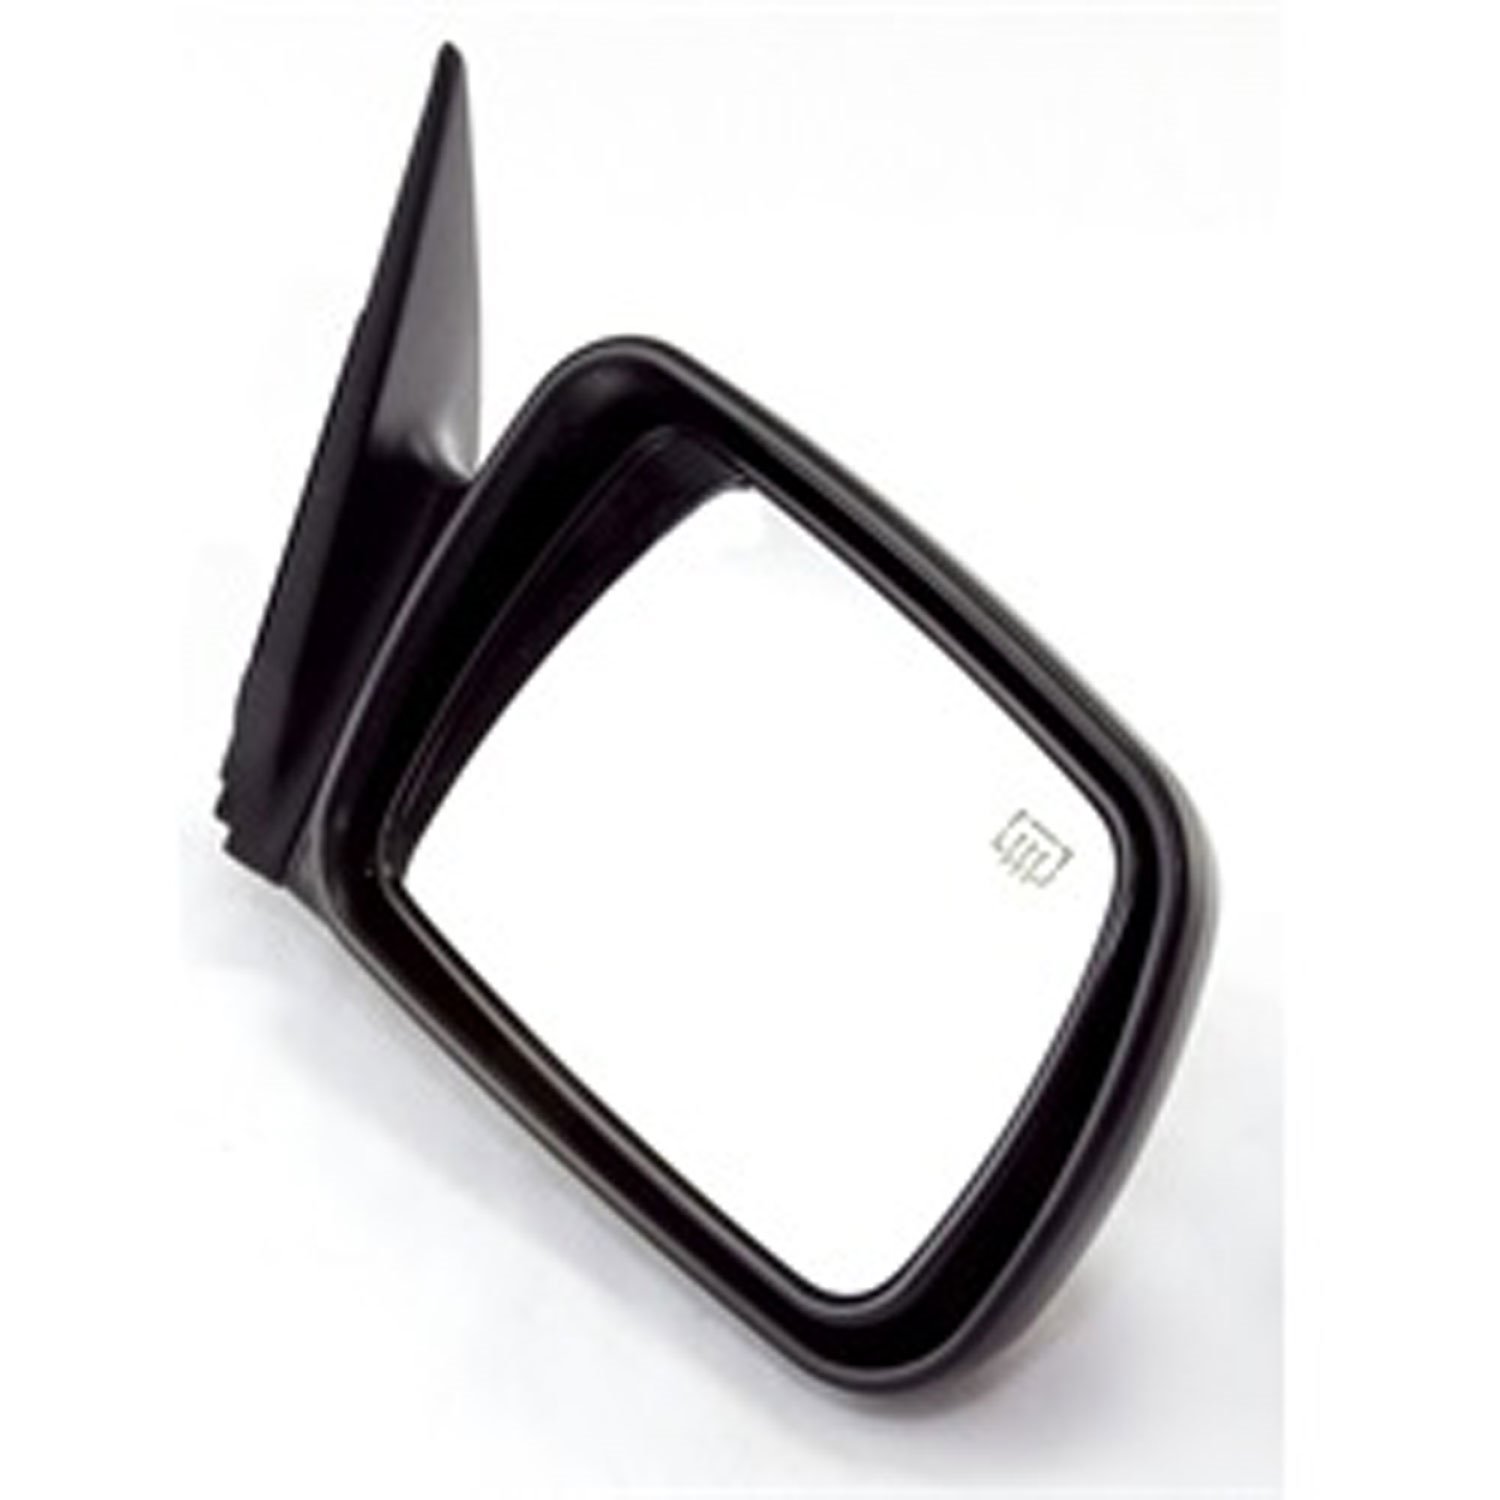 This black folding power door mirror from Omix-ADA is heated and fits 97-01 Jeep Cherokee. Connects